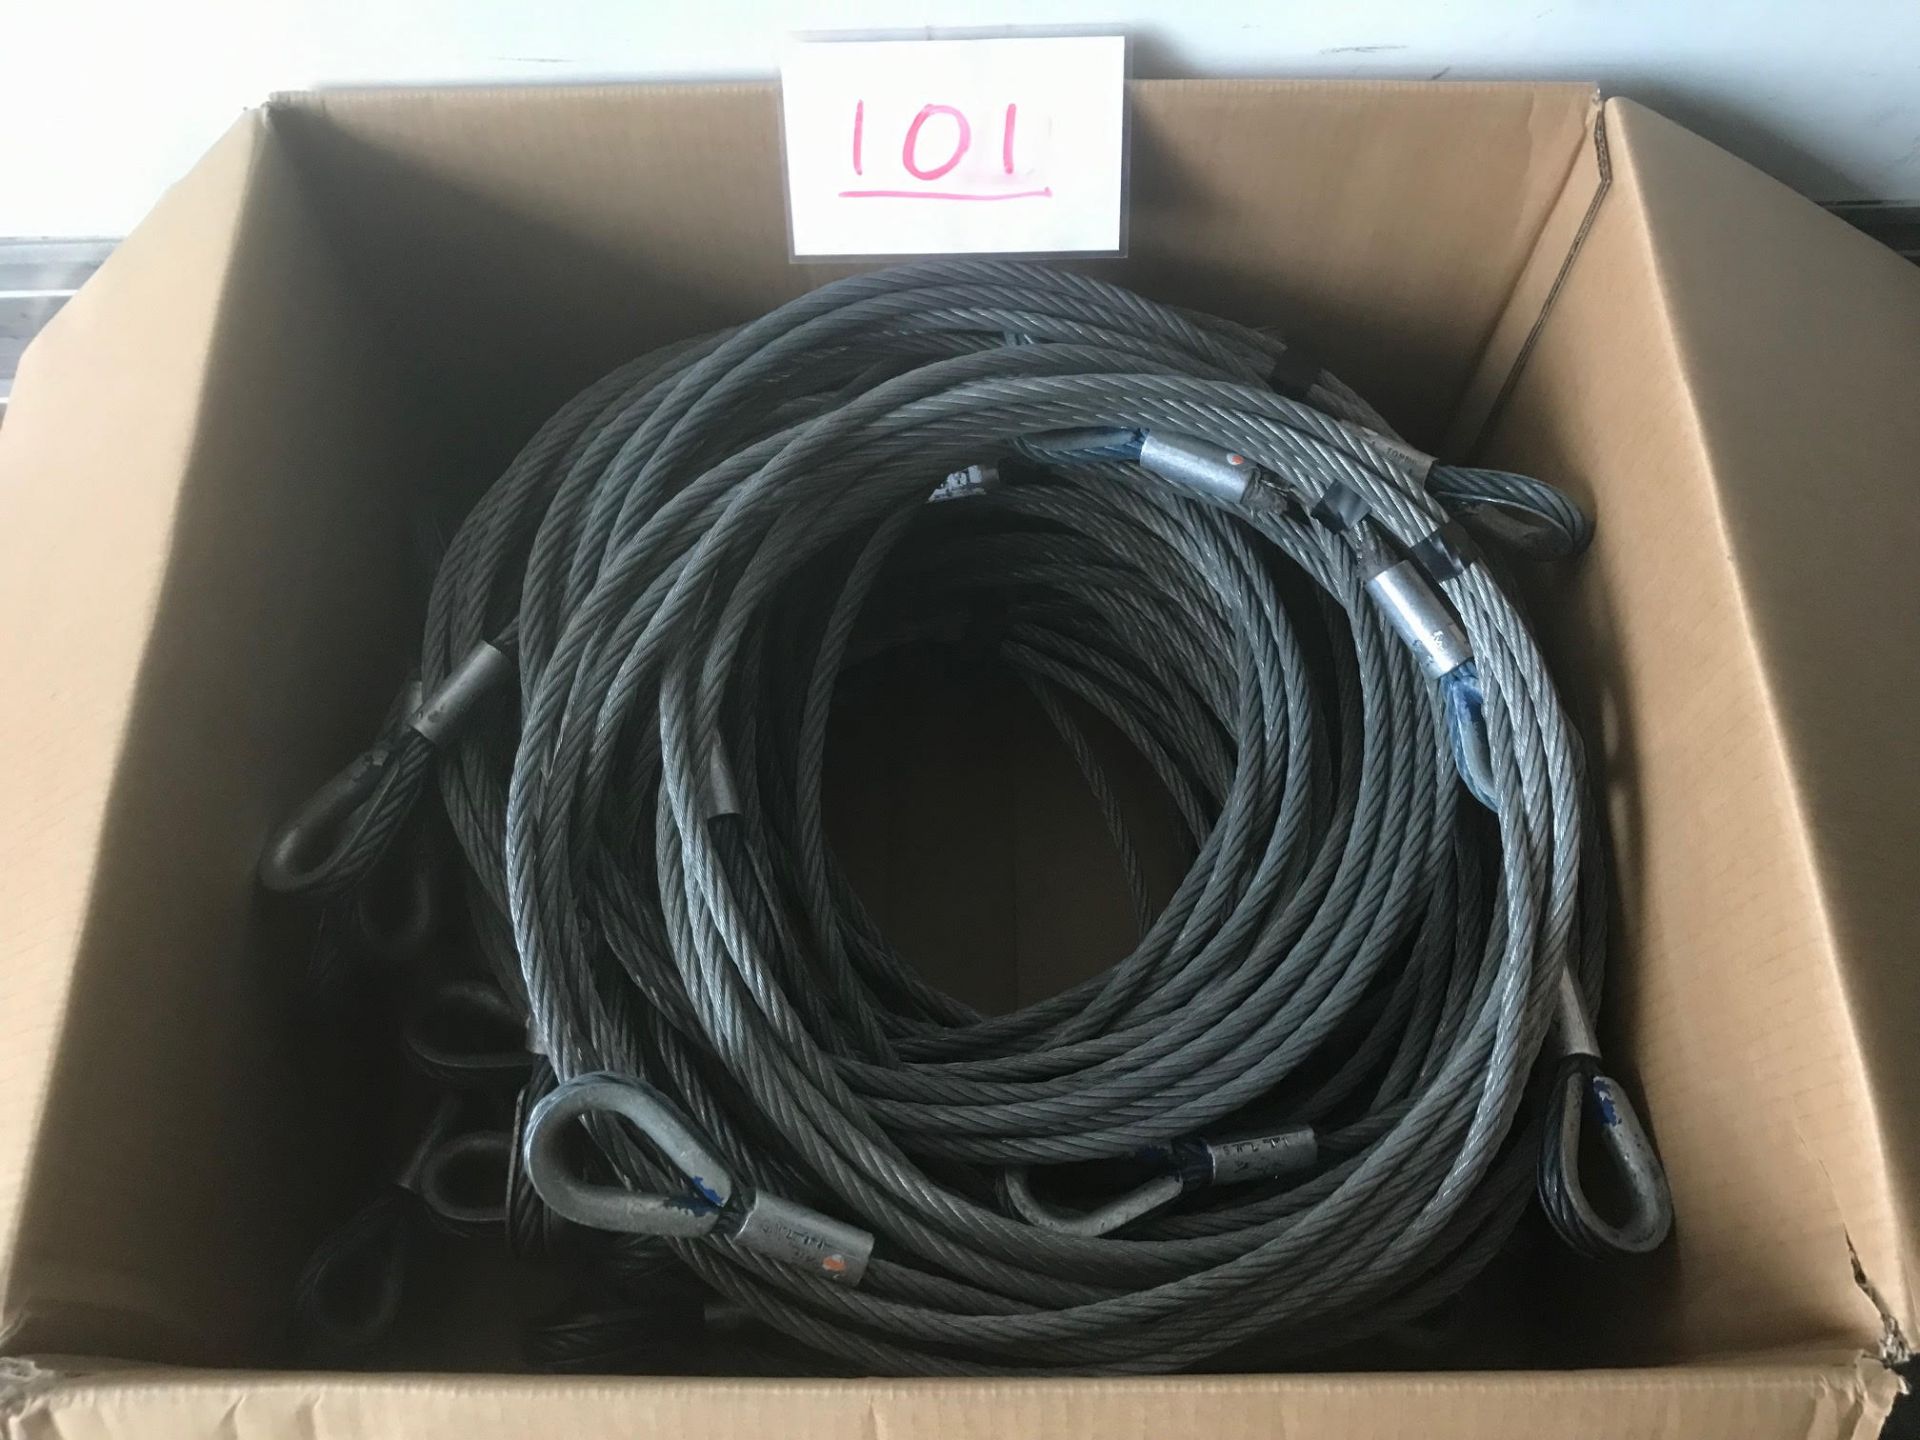 23x Steel 1 tonne 5M wire ropes